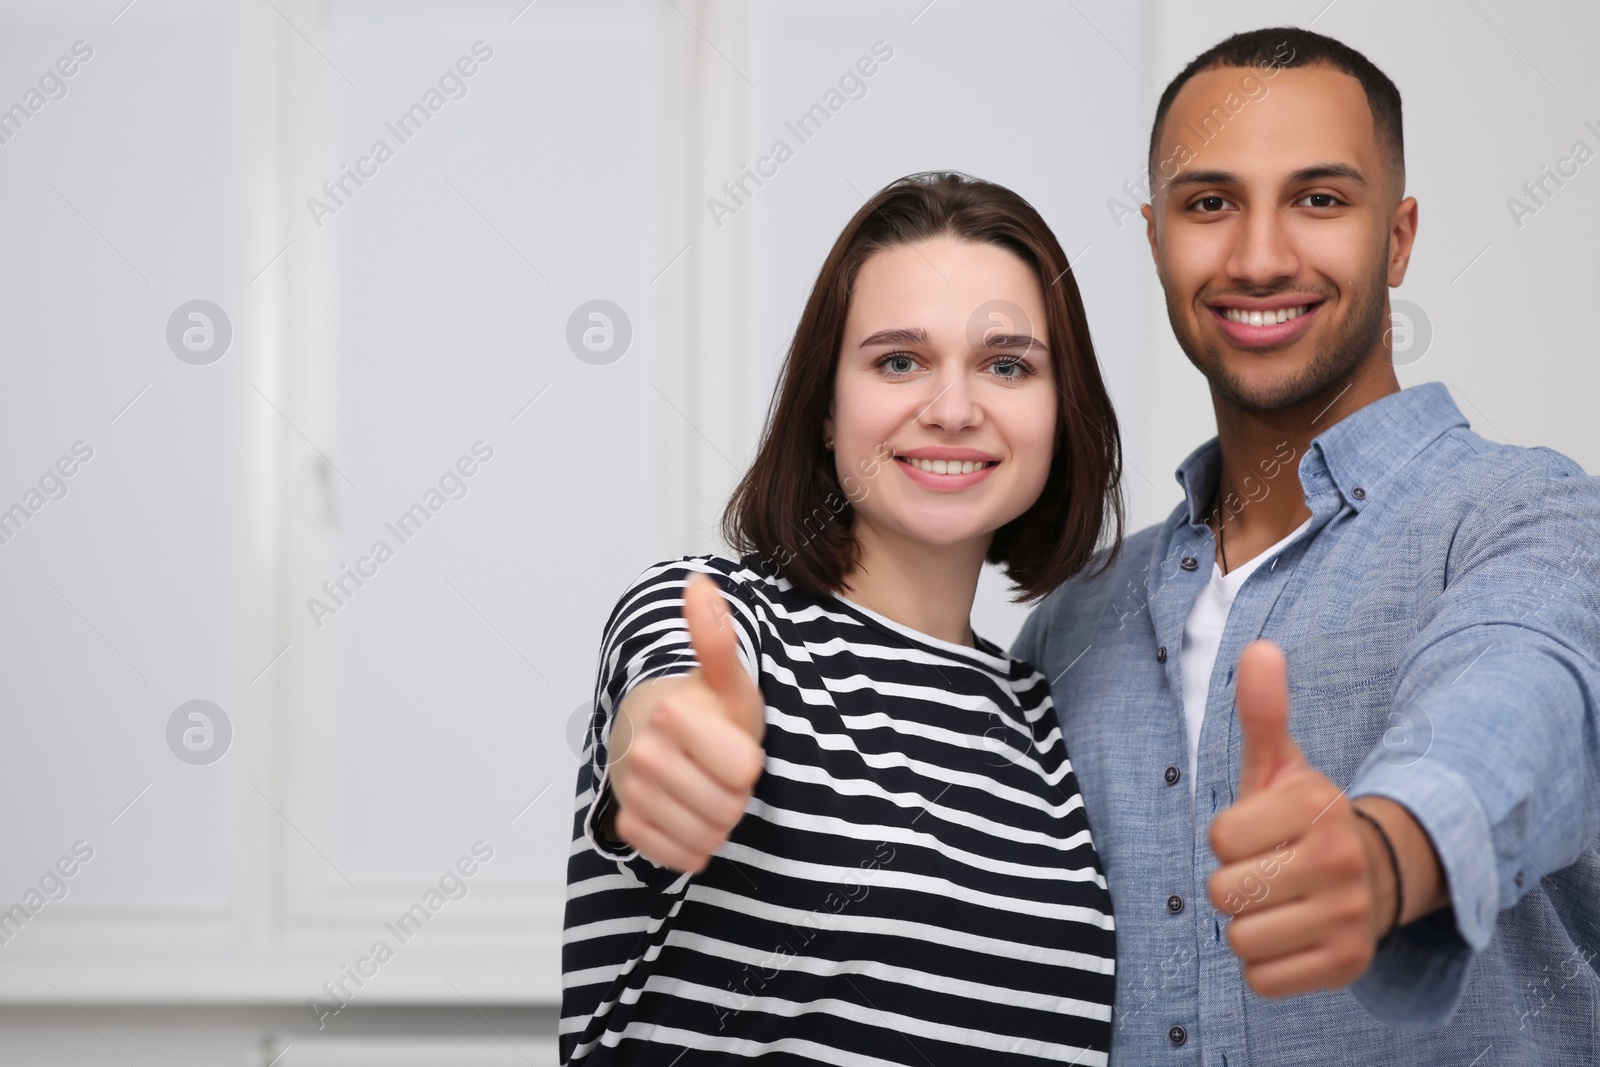 Photo of Dating agency. Happy couple showing thumbs up near white wall, space for text